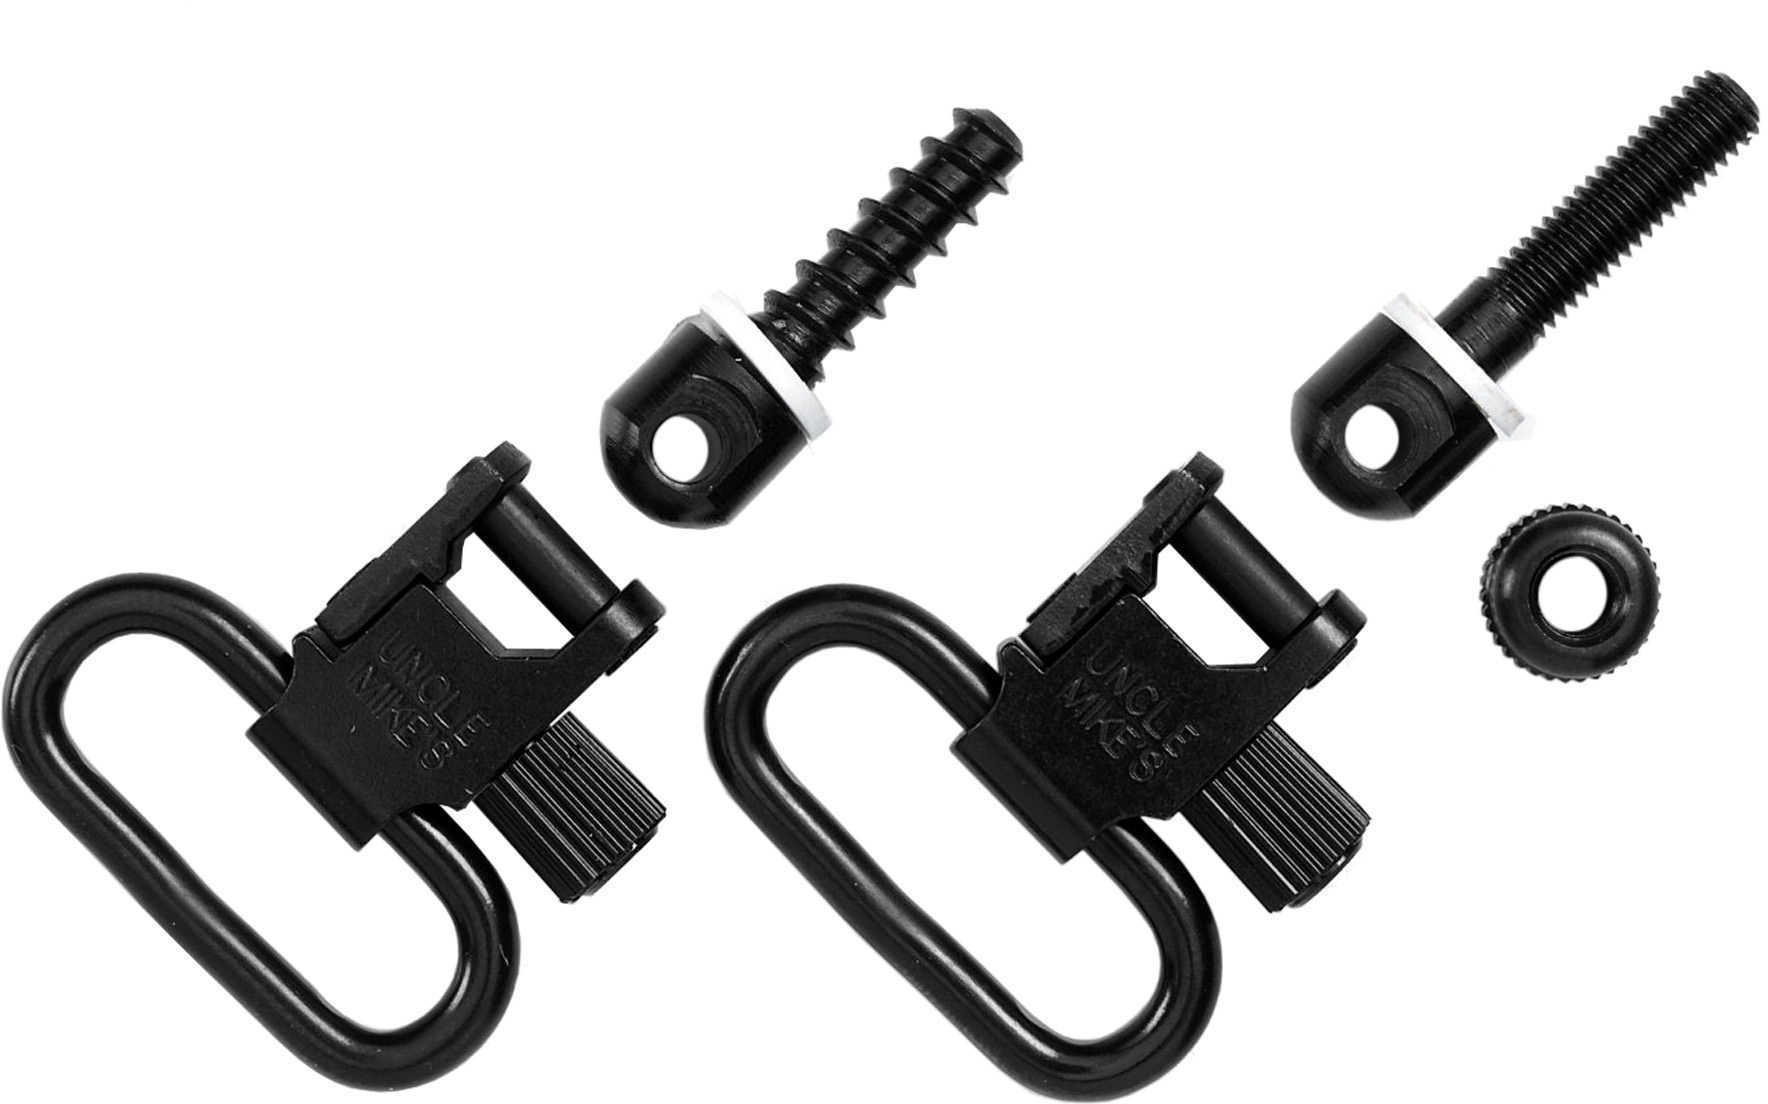 Uncle Mikes Swivels for Bolt Actions - Machine Screw Type QD 115 1/4" Blued fore end base woo MO10013